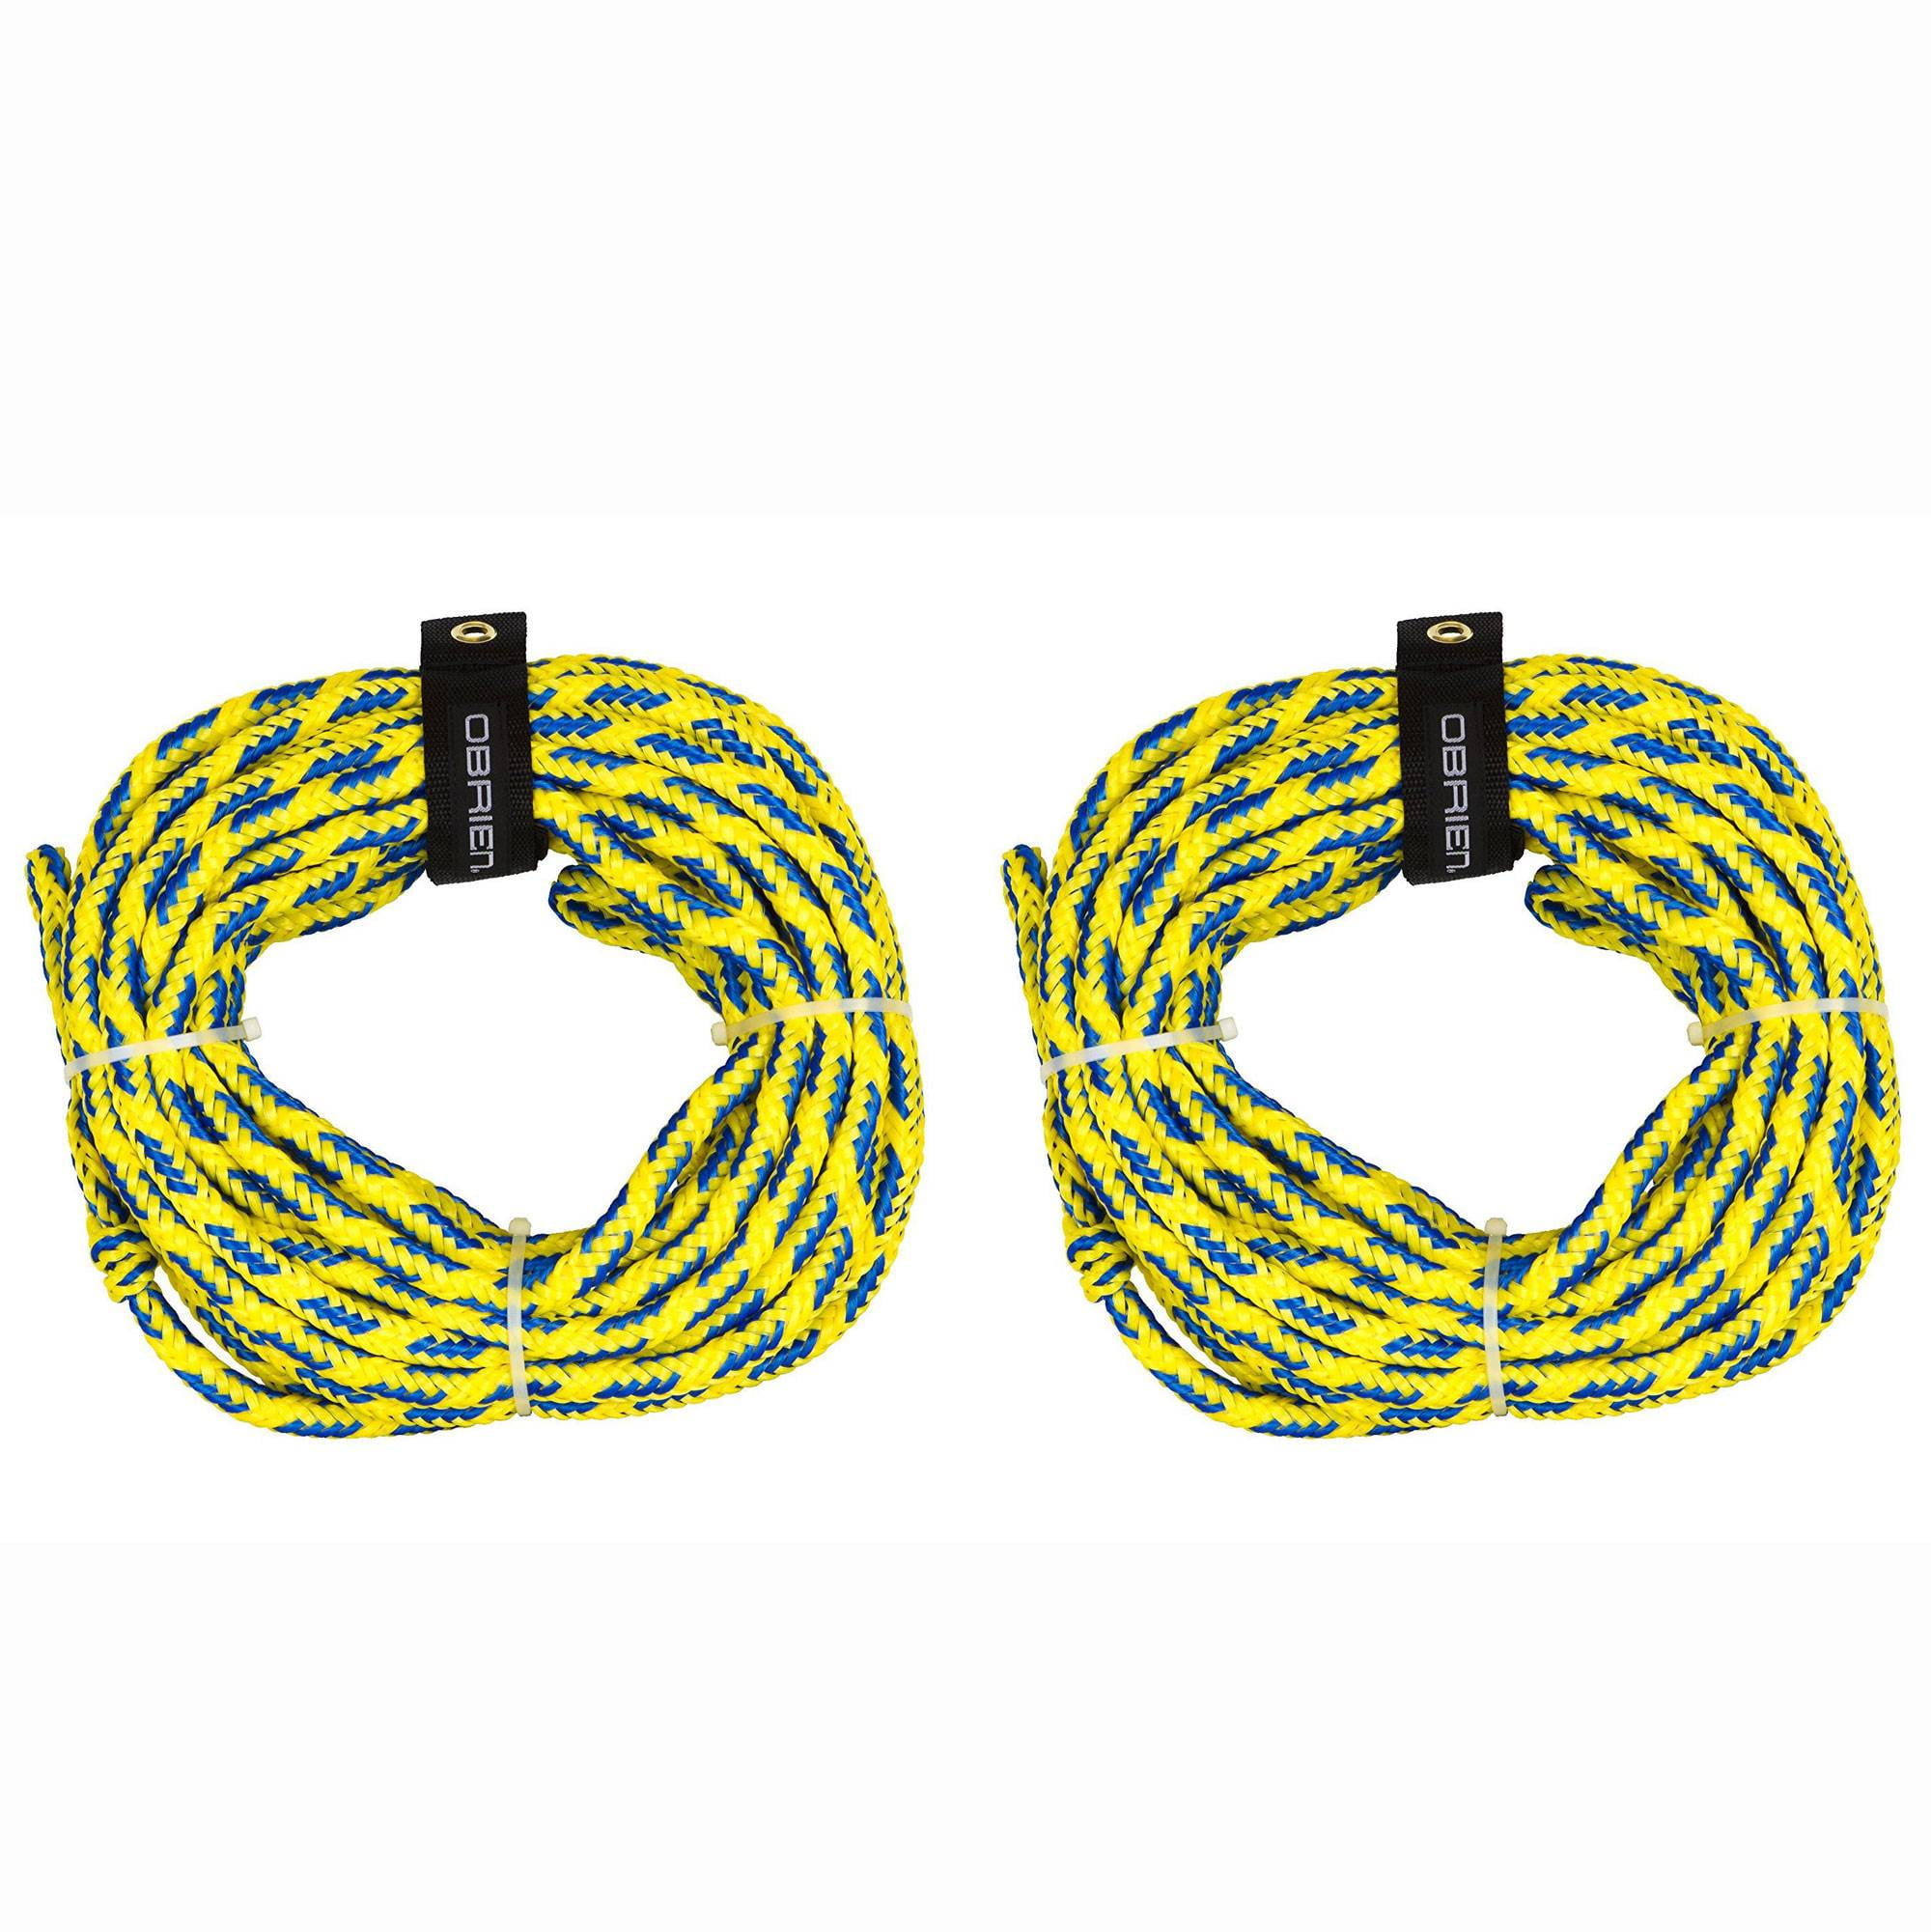 Blue OBrien 2 Person Floating Towable Tube Rope 